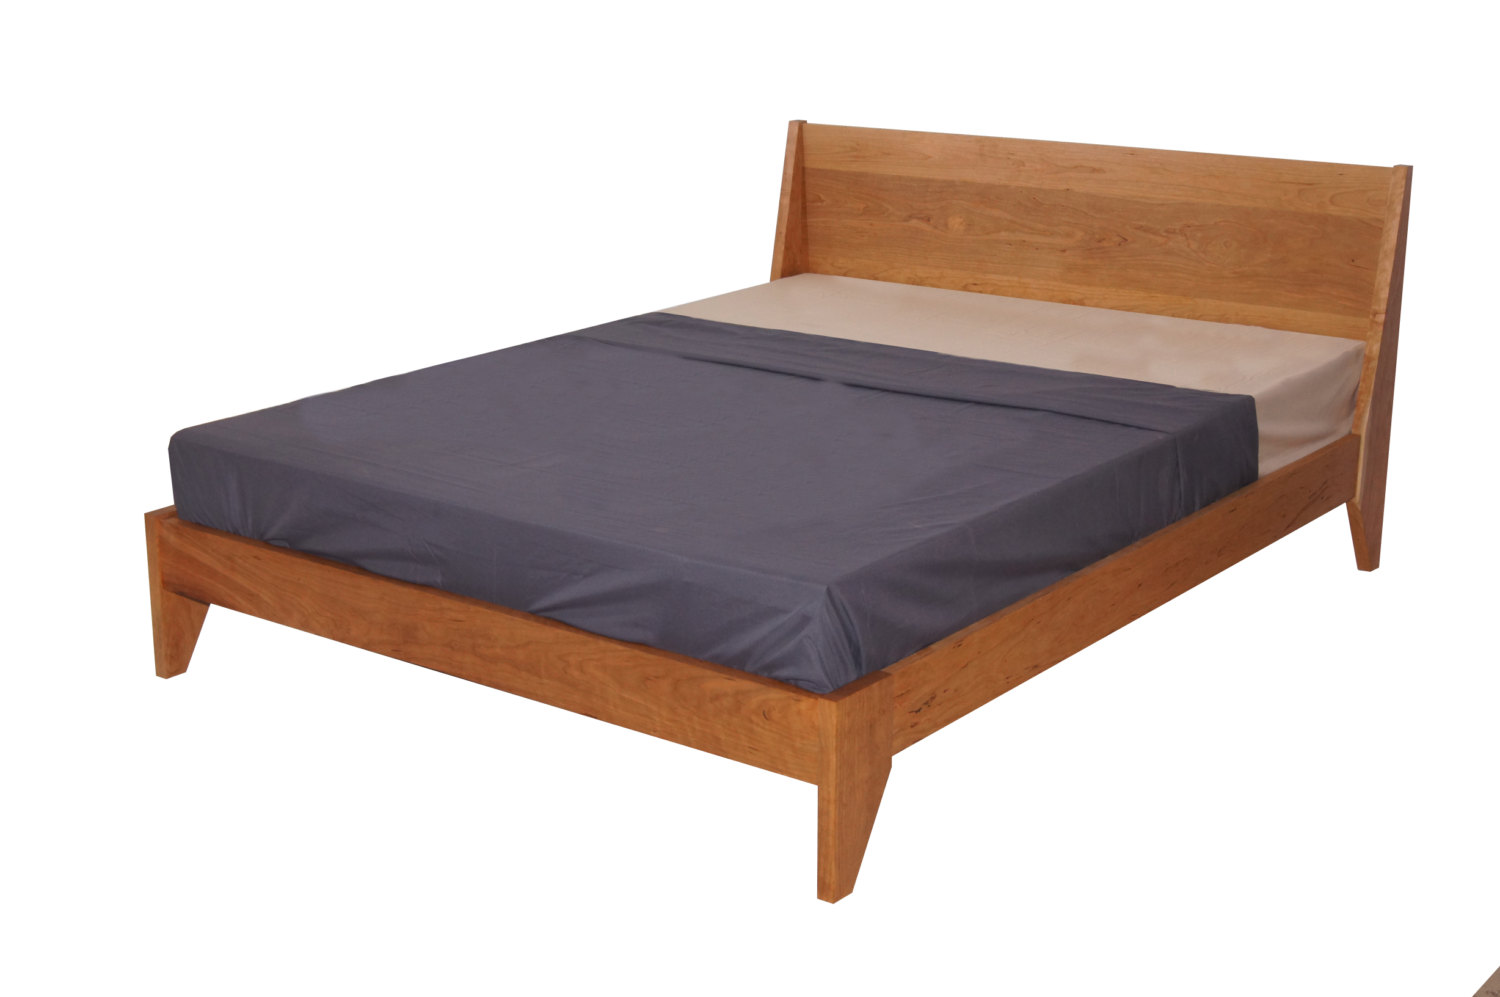 full size wooden bed frame with headboard brown wooden bed frame with headboard and four legs completed OBHLMHU